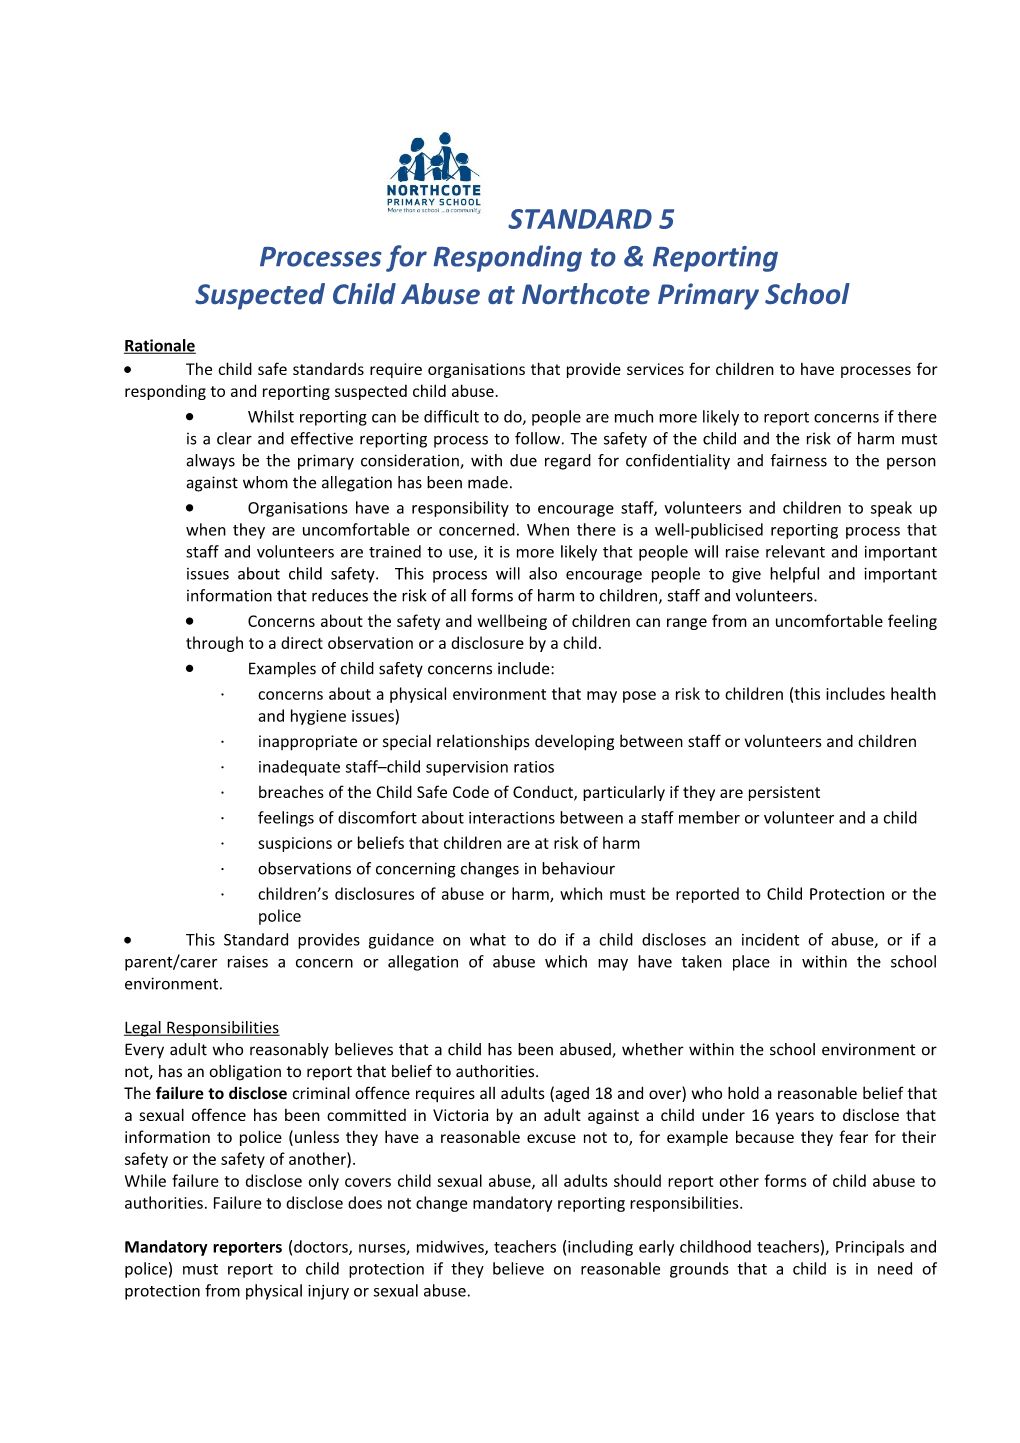 Processes for Responding to Reporting